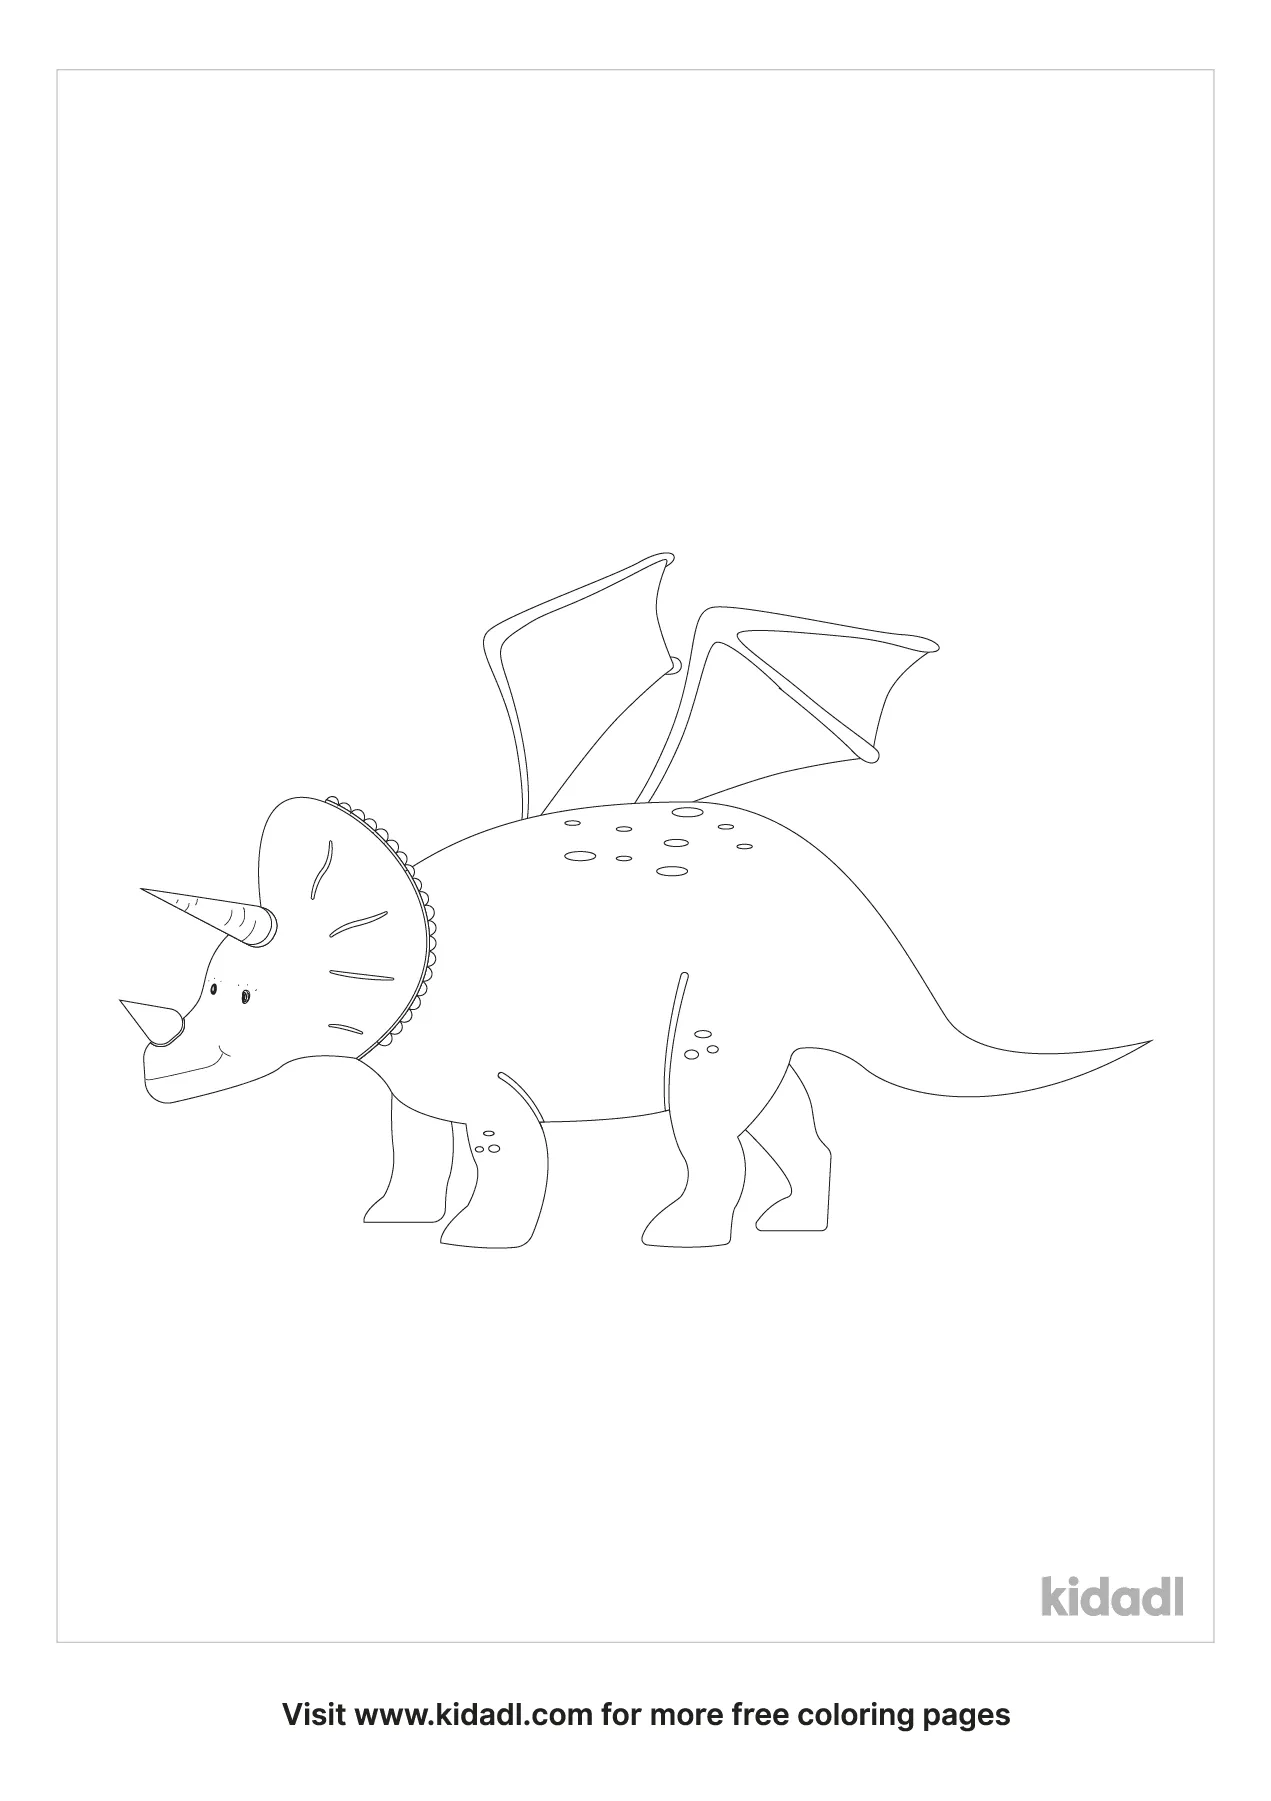 Triceratops With Wings Coloring Page